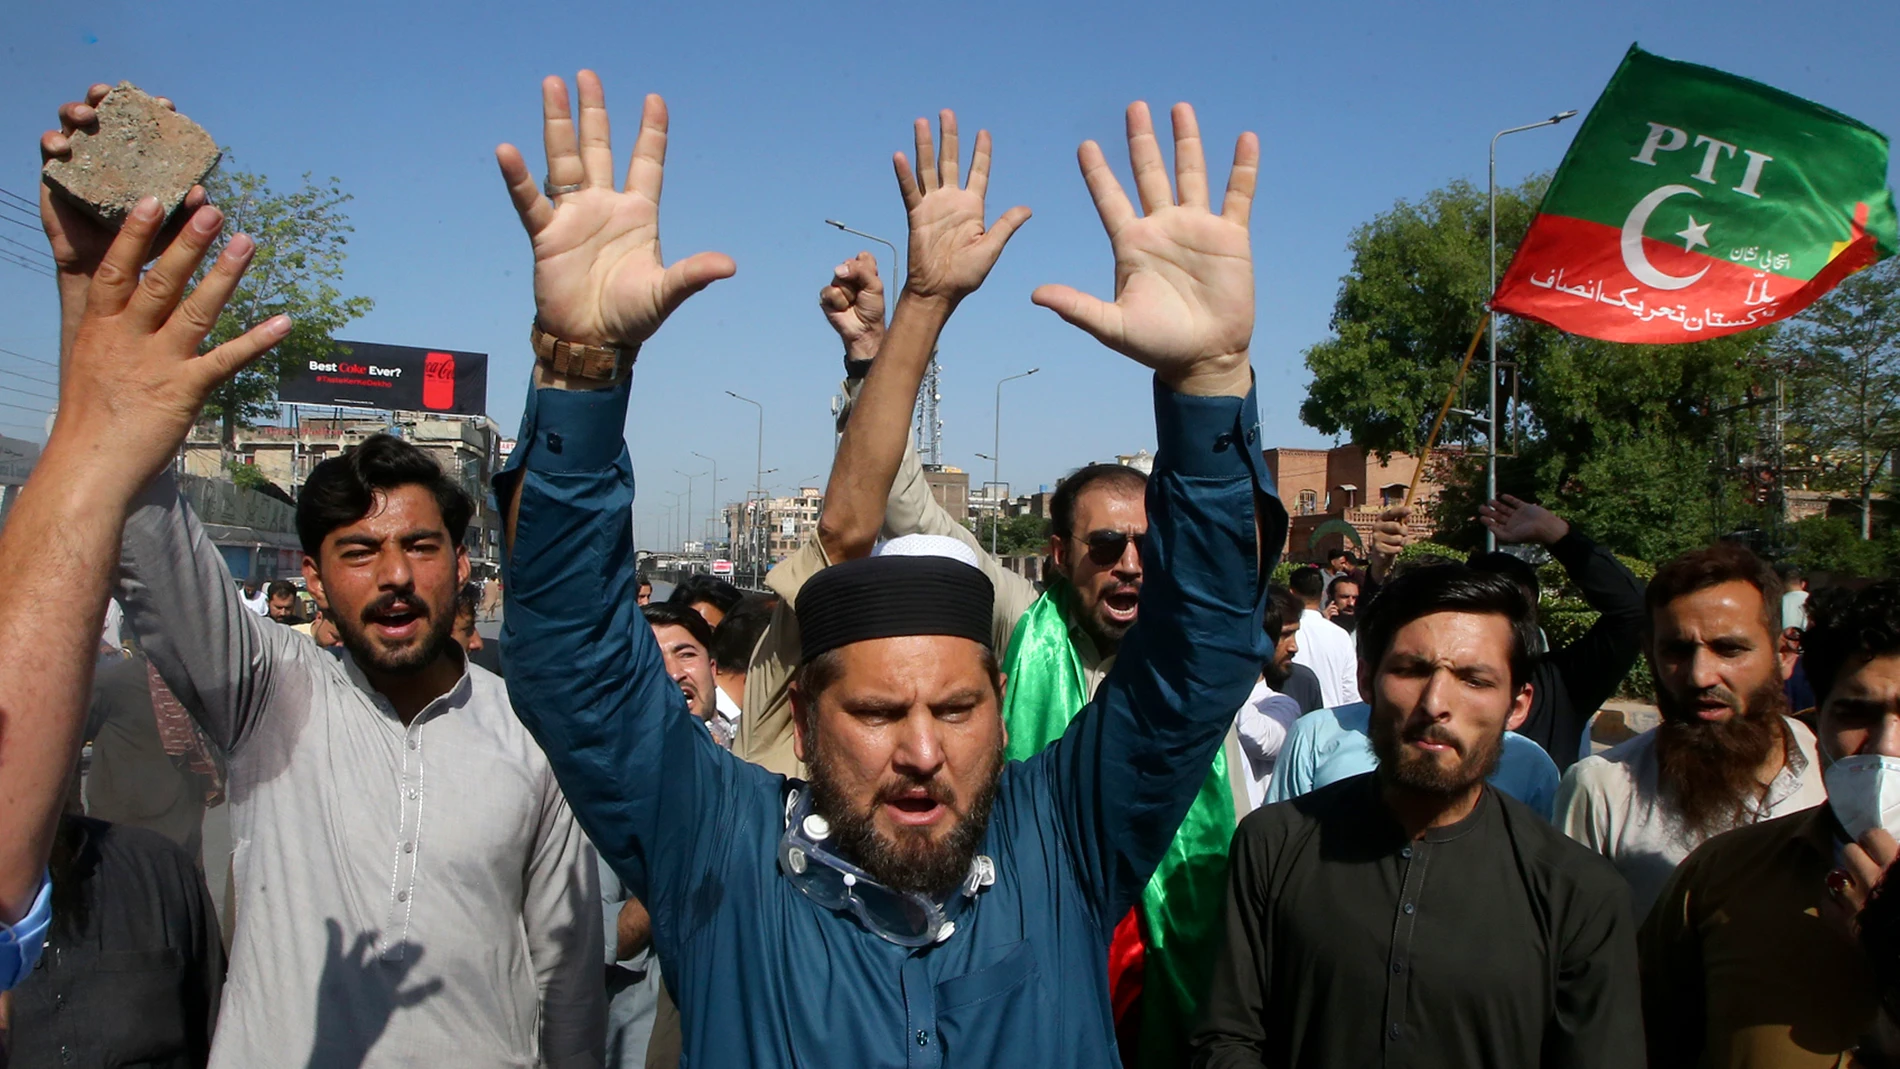 Supporters of Pakistan's former Prime Minister Imran Khan chant slogans as they block a road as a protest to condemn the arrest of their leader, in Peshawar, Pakistan, Tuesday, May 9, 2023. Pakistan's anti-graft agents on Tuesday arrested former Prime Minister Khan as he appeared in a court in the capital, Islamabad, to face charges in multiple graft cases, police and officials from his party said. (AP Photo/Muhammad Sajjad)